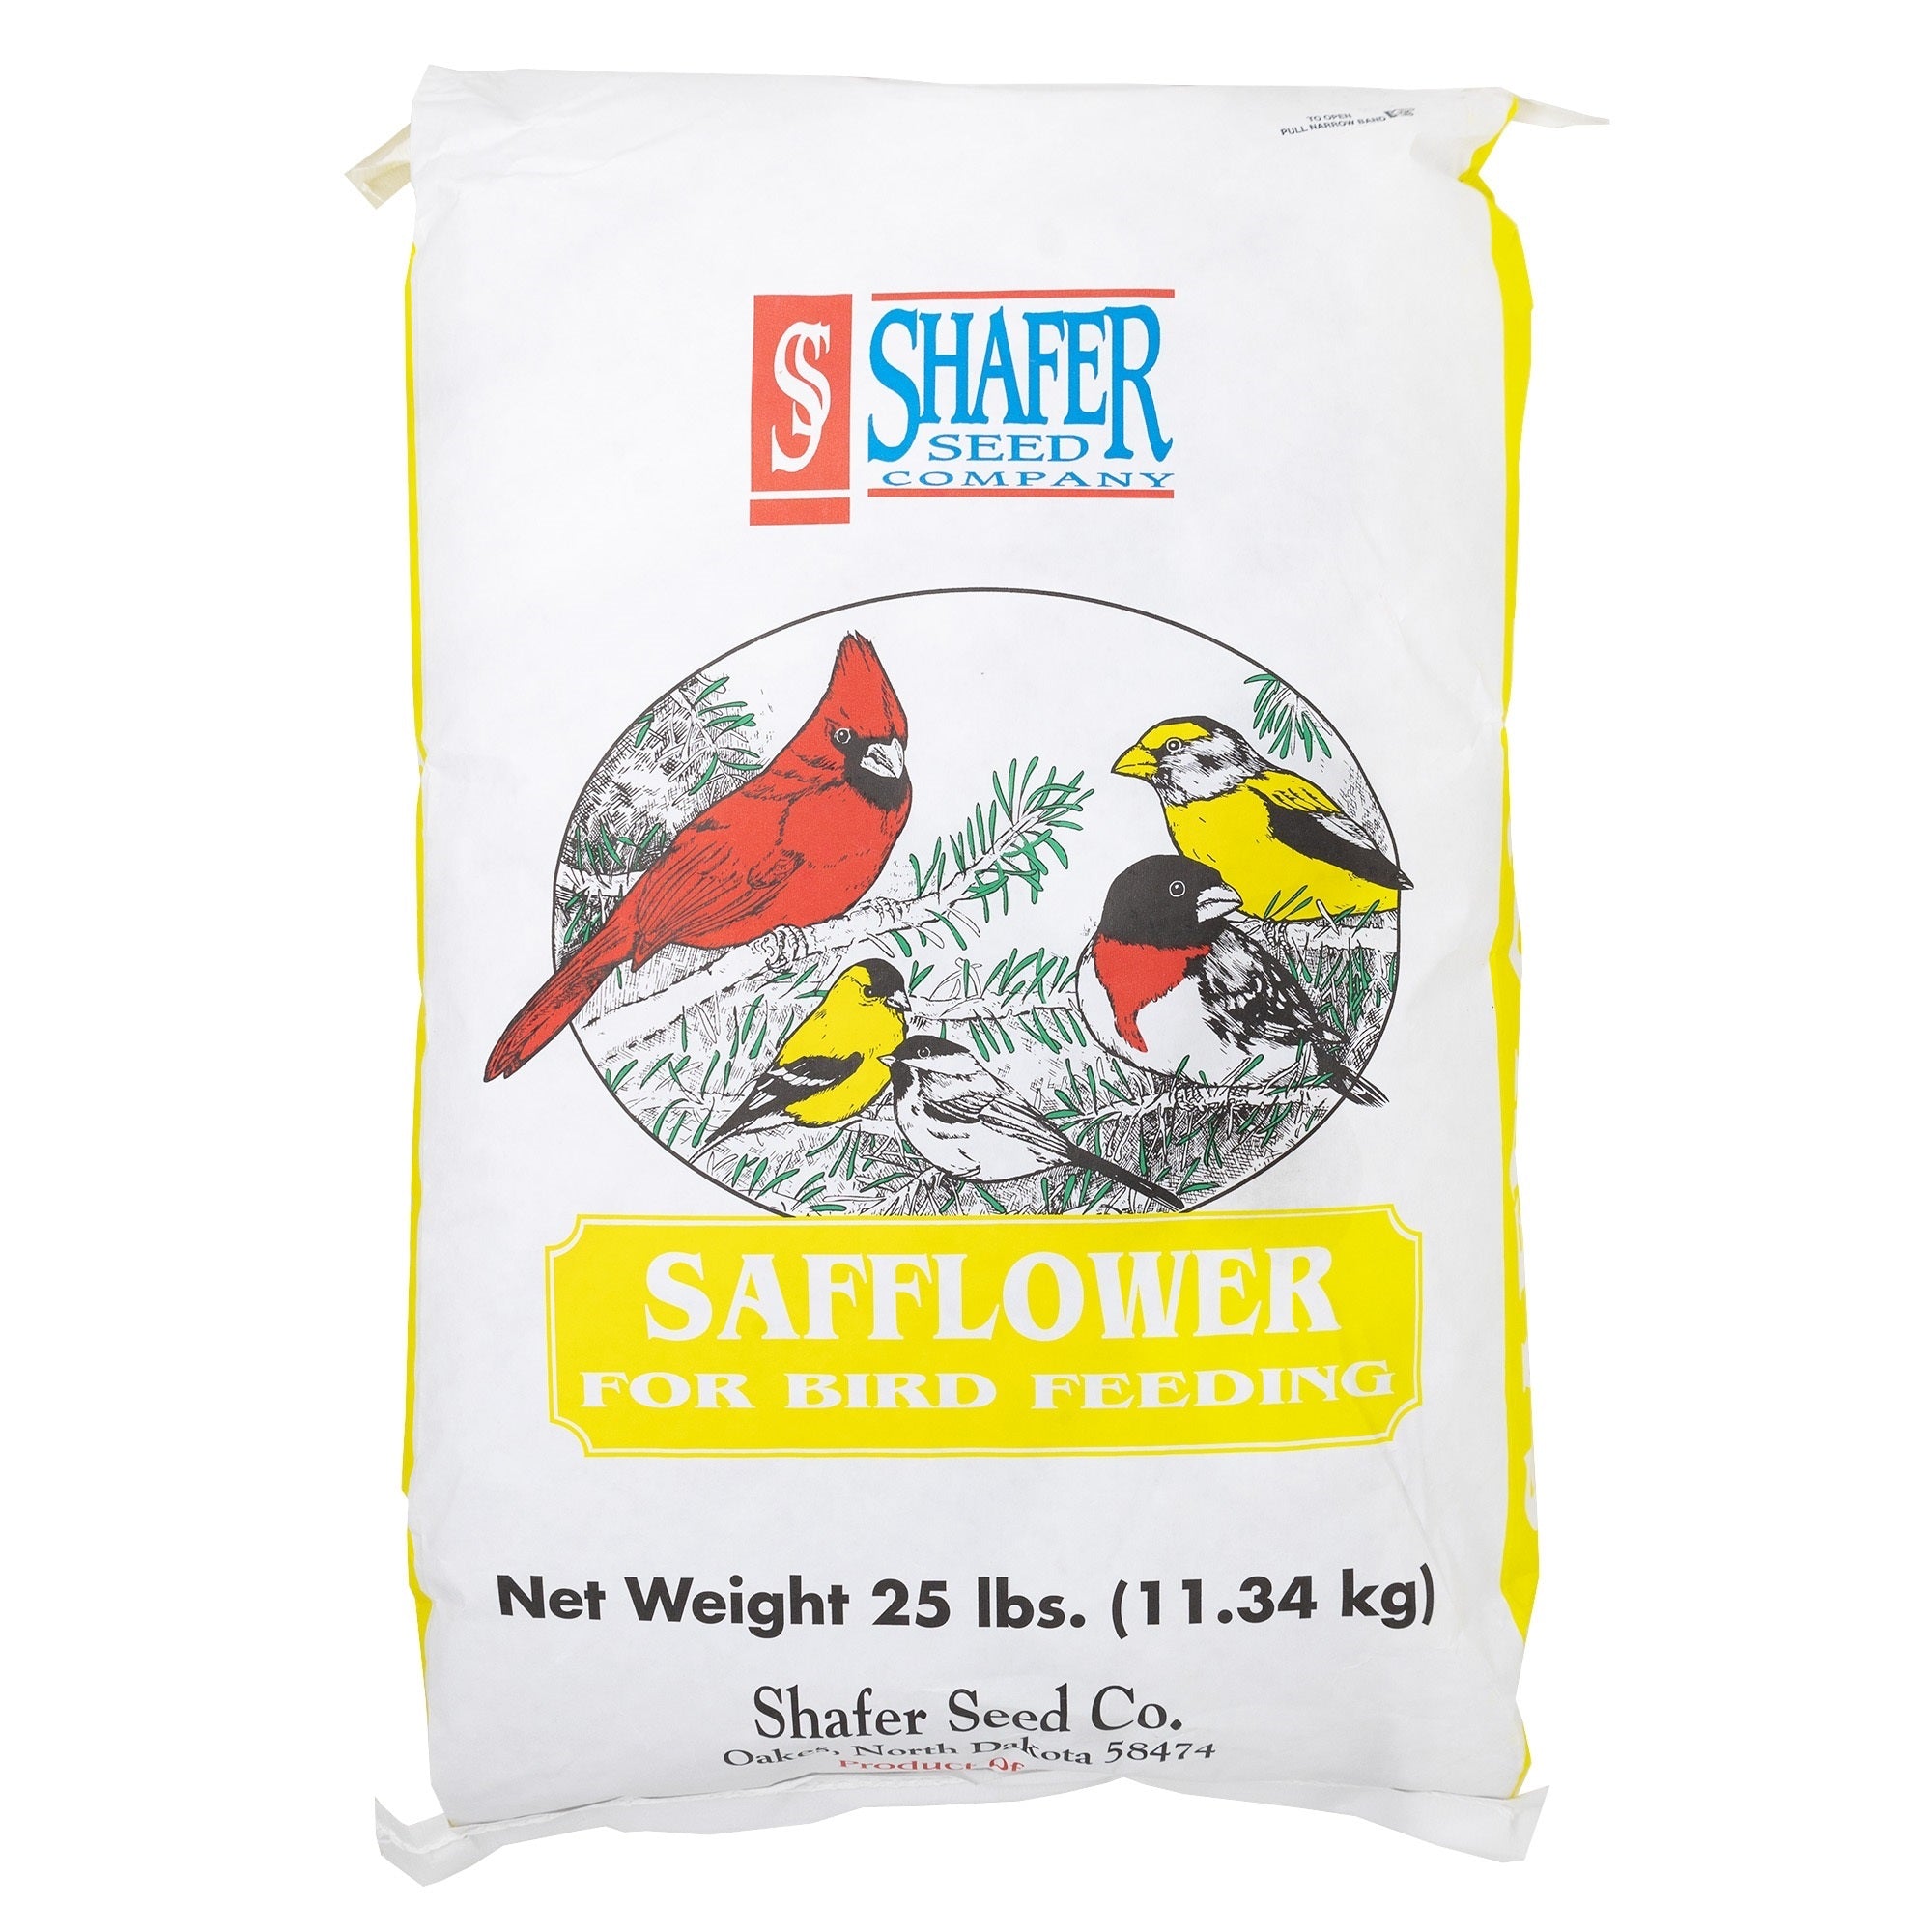 Shafer Seed Company Safflower Seed - 25 lb